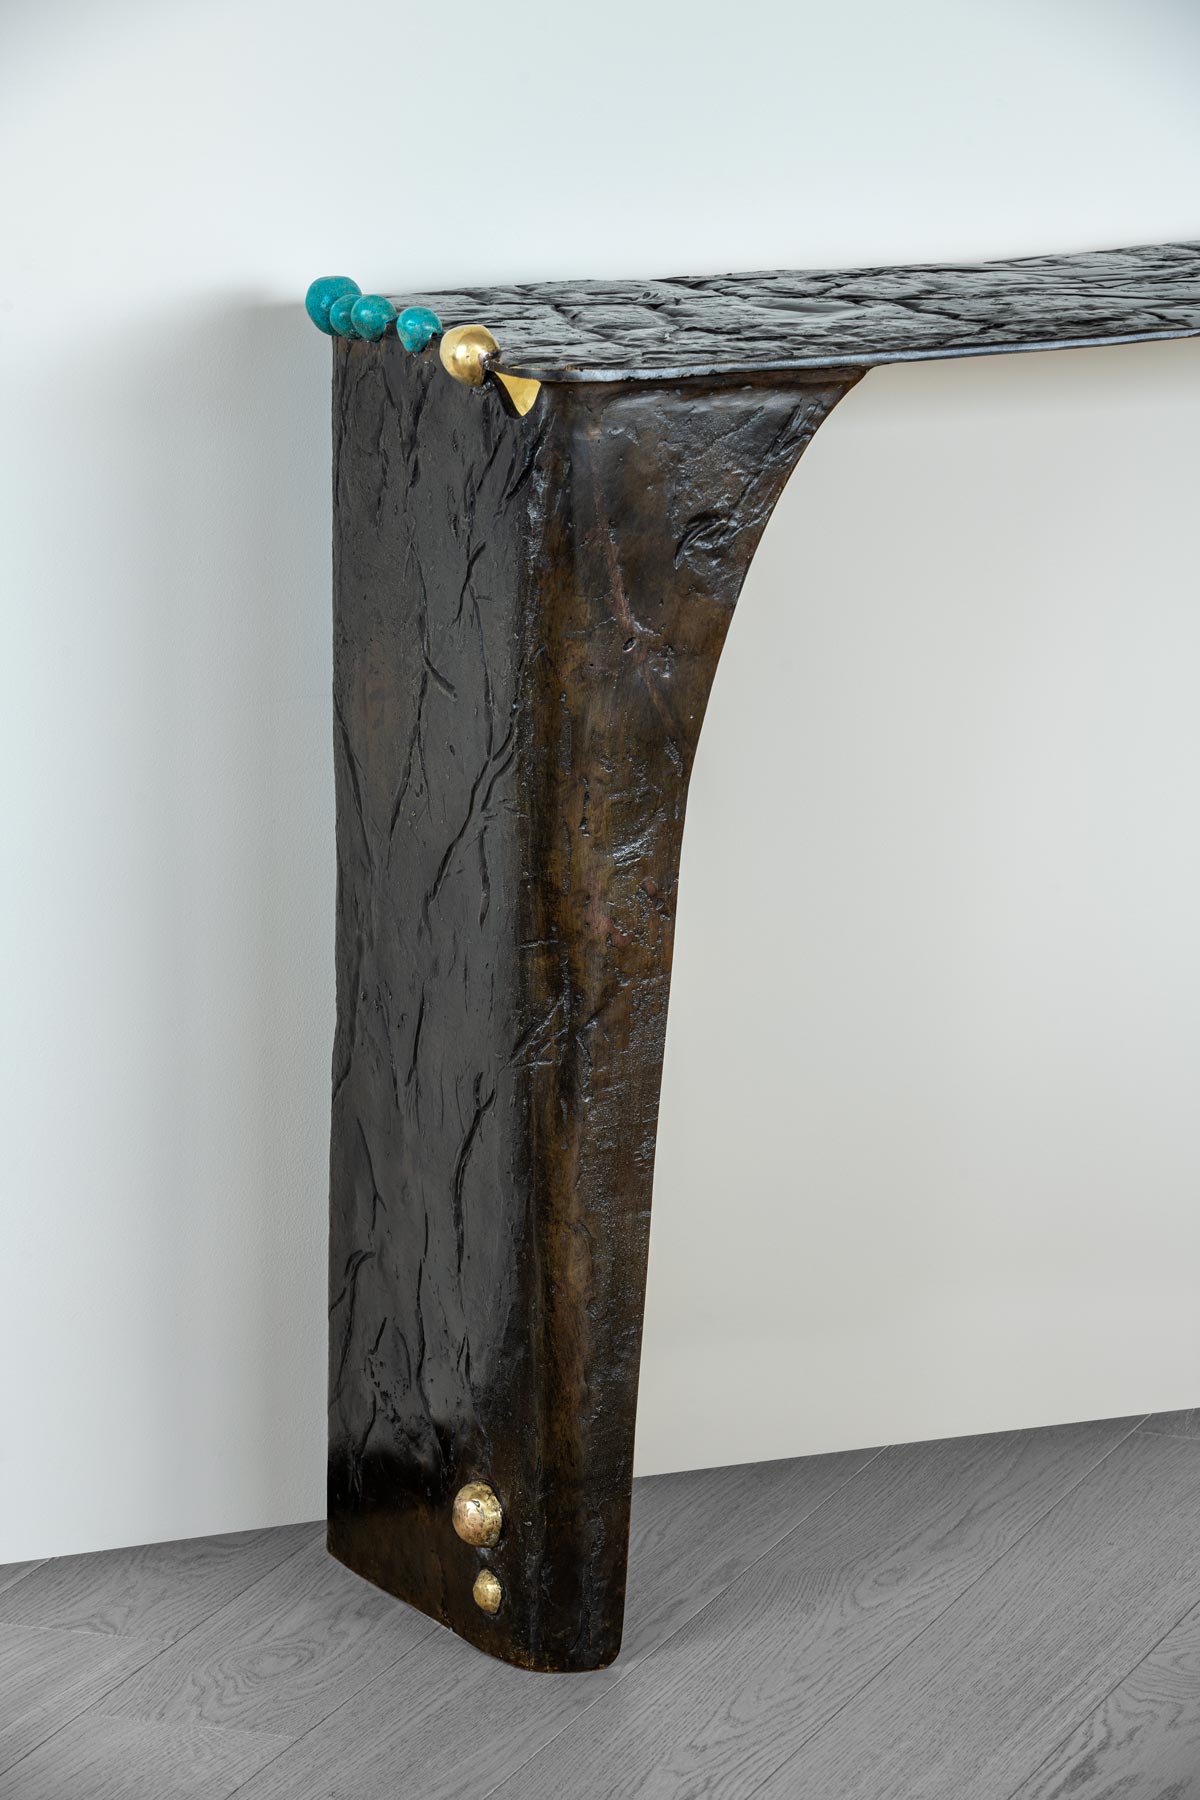 The Unwrapped Console Table, Veronica Mishaan